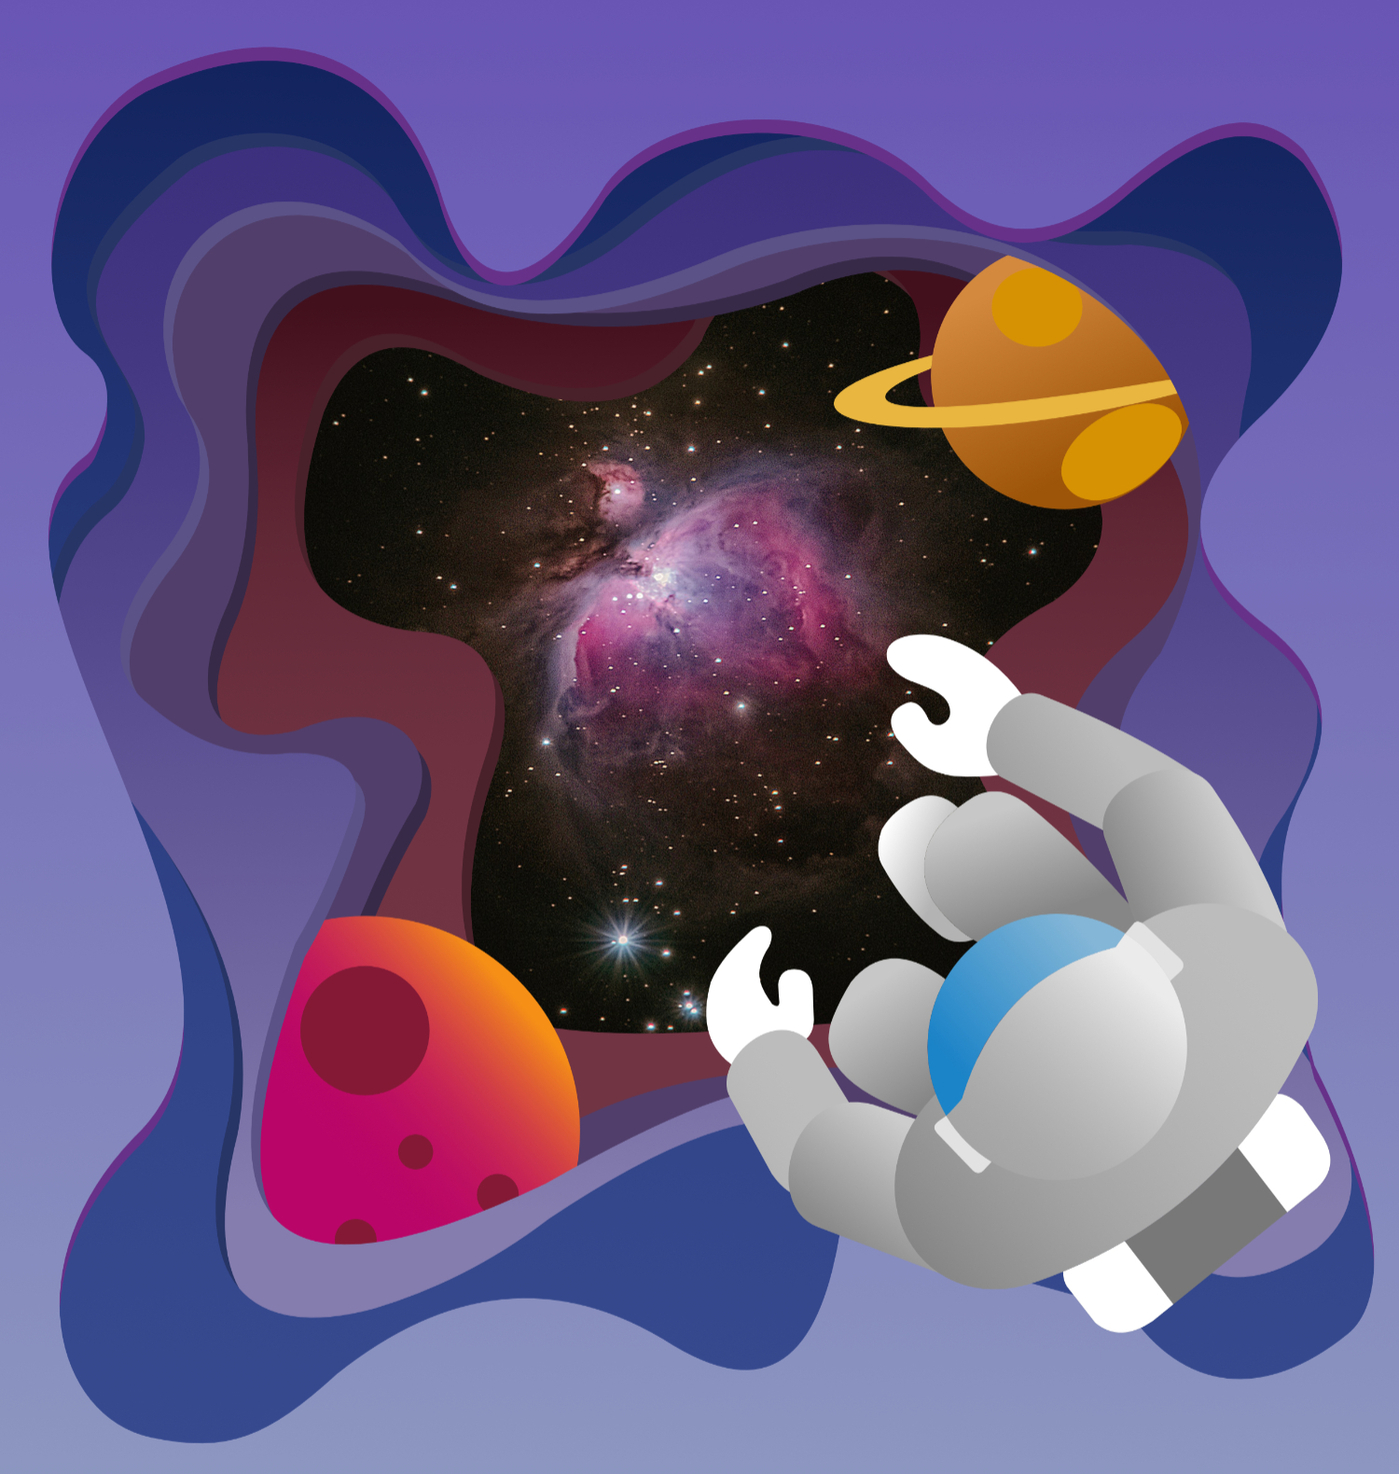 Astronout 
Keywords: Astronout Affinity Designer SVG Space drawing